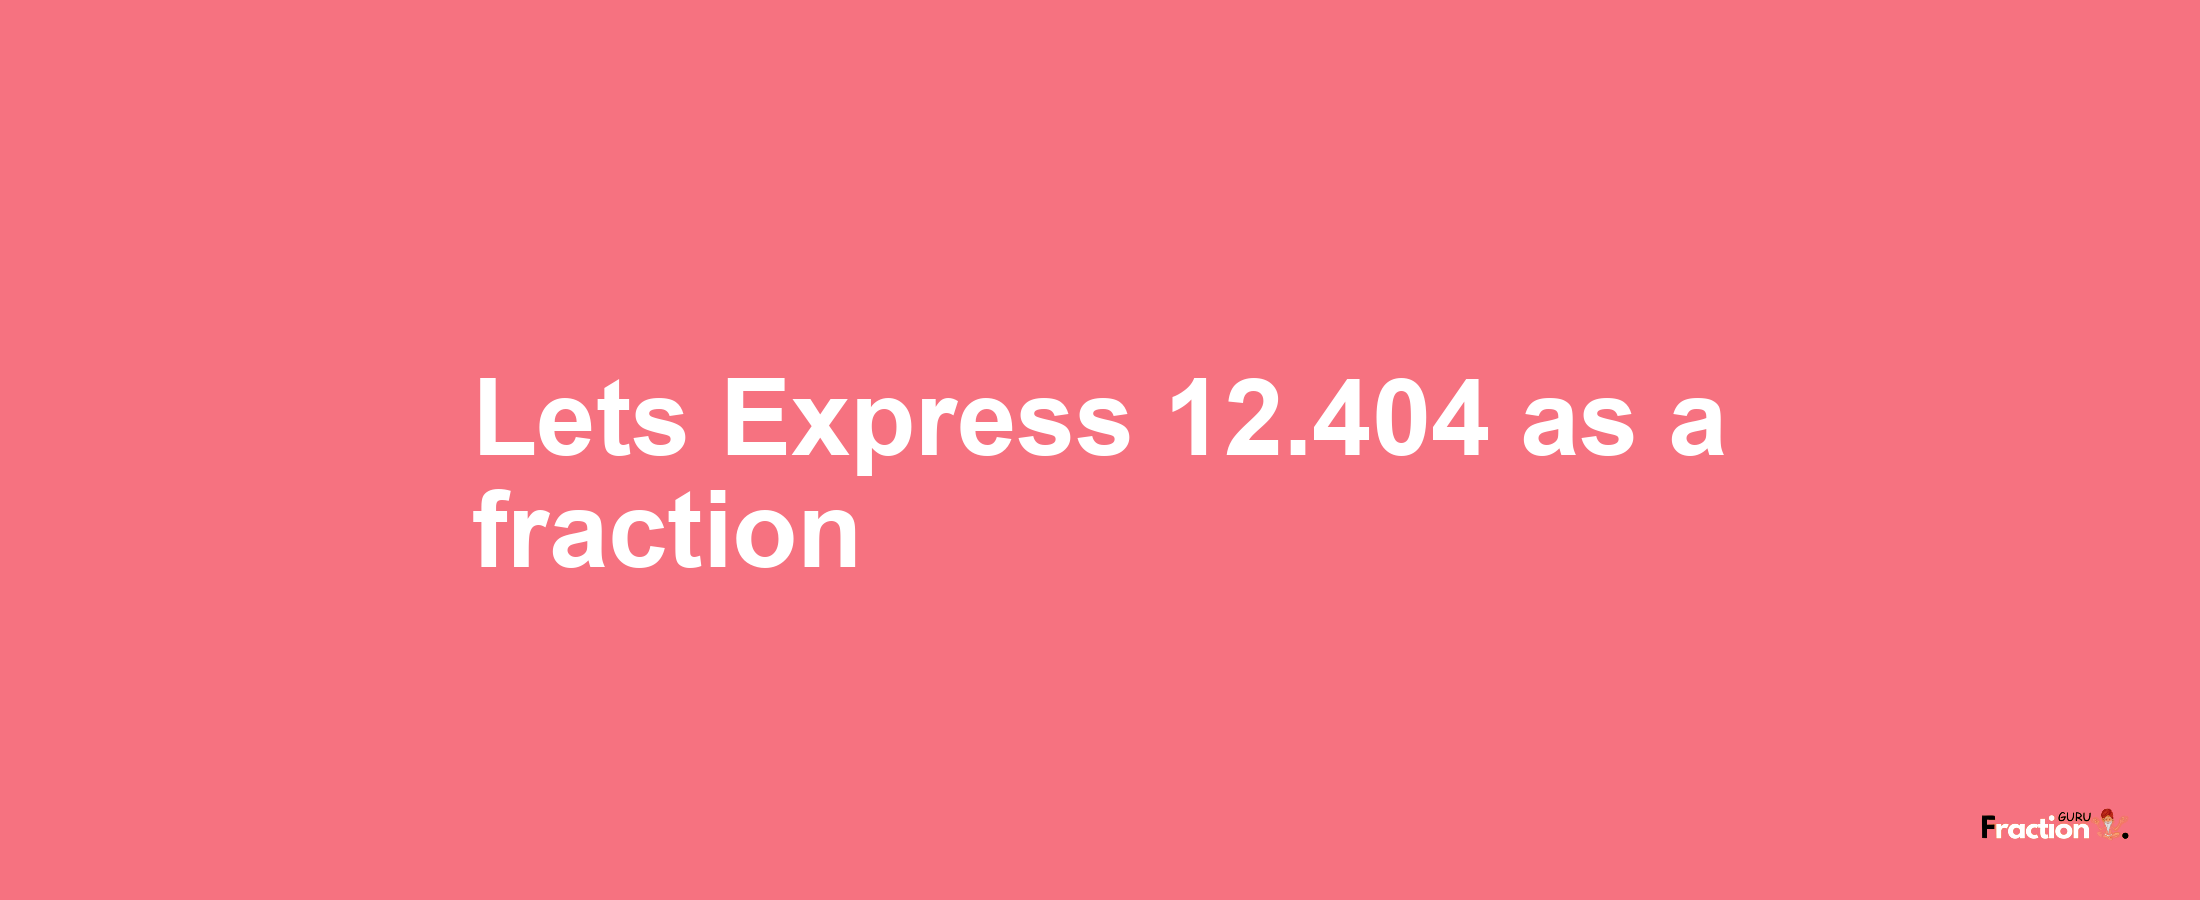 Lets Express 12.404 as afraction